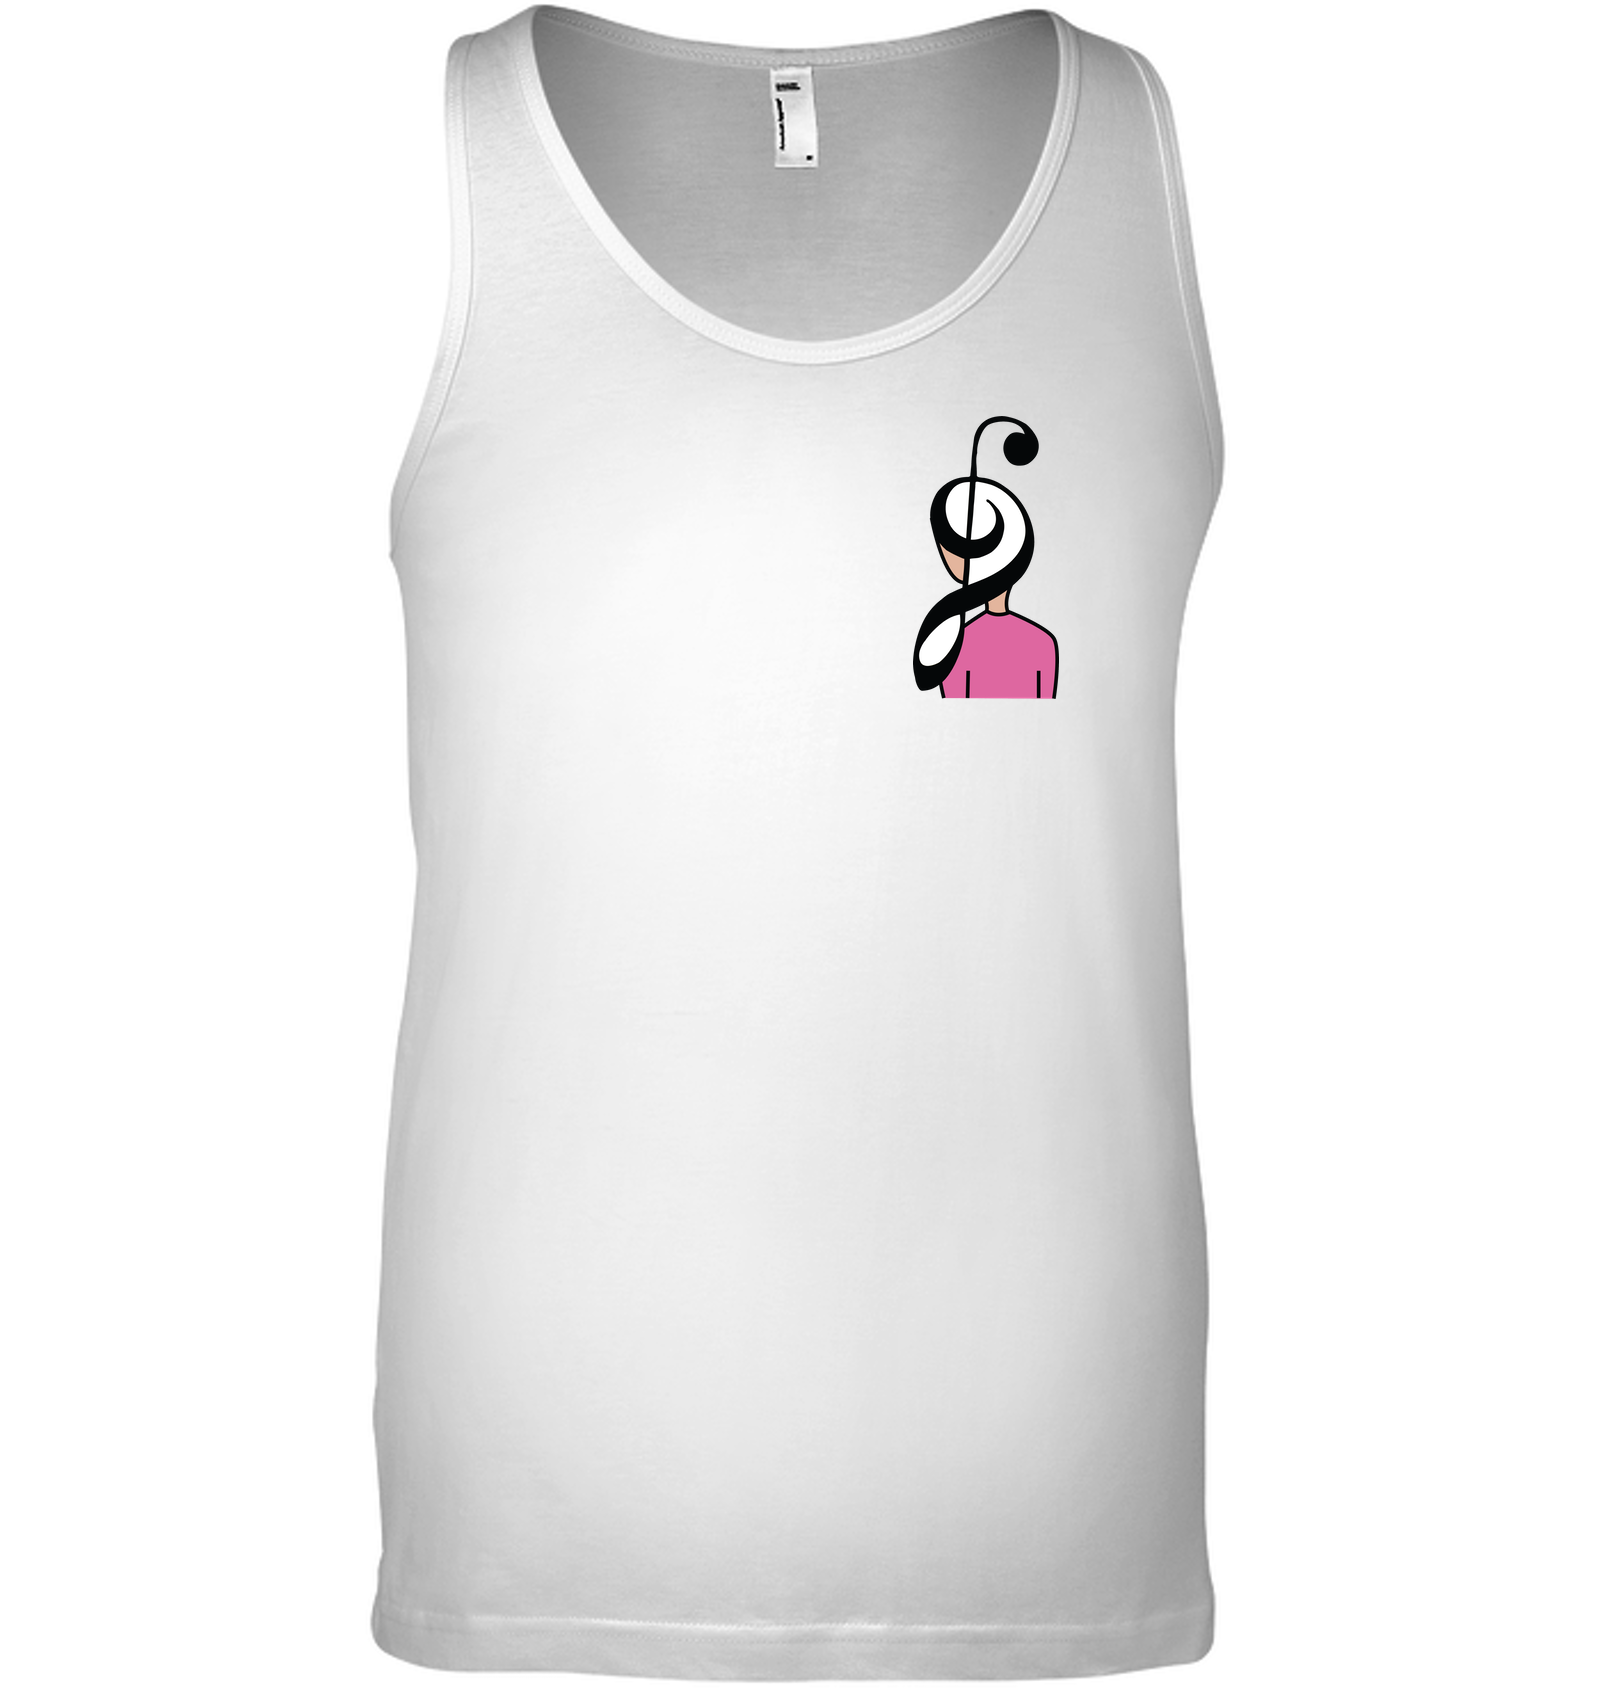 Musical Hairstyle (Pocket Size) - Bella + Canvas Unisex Jersey Tank